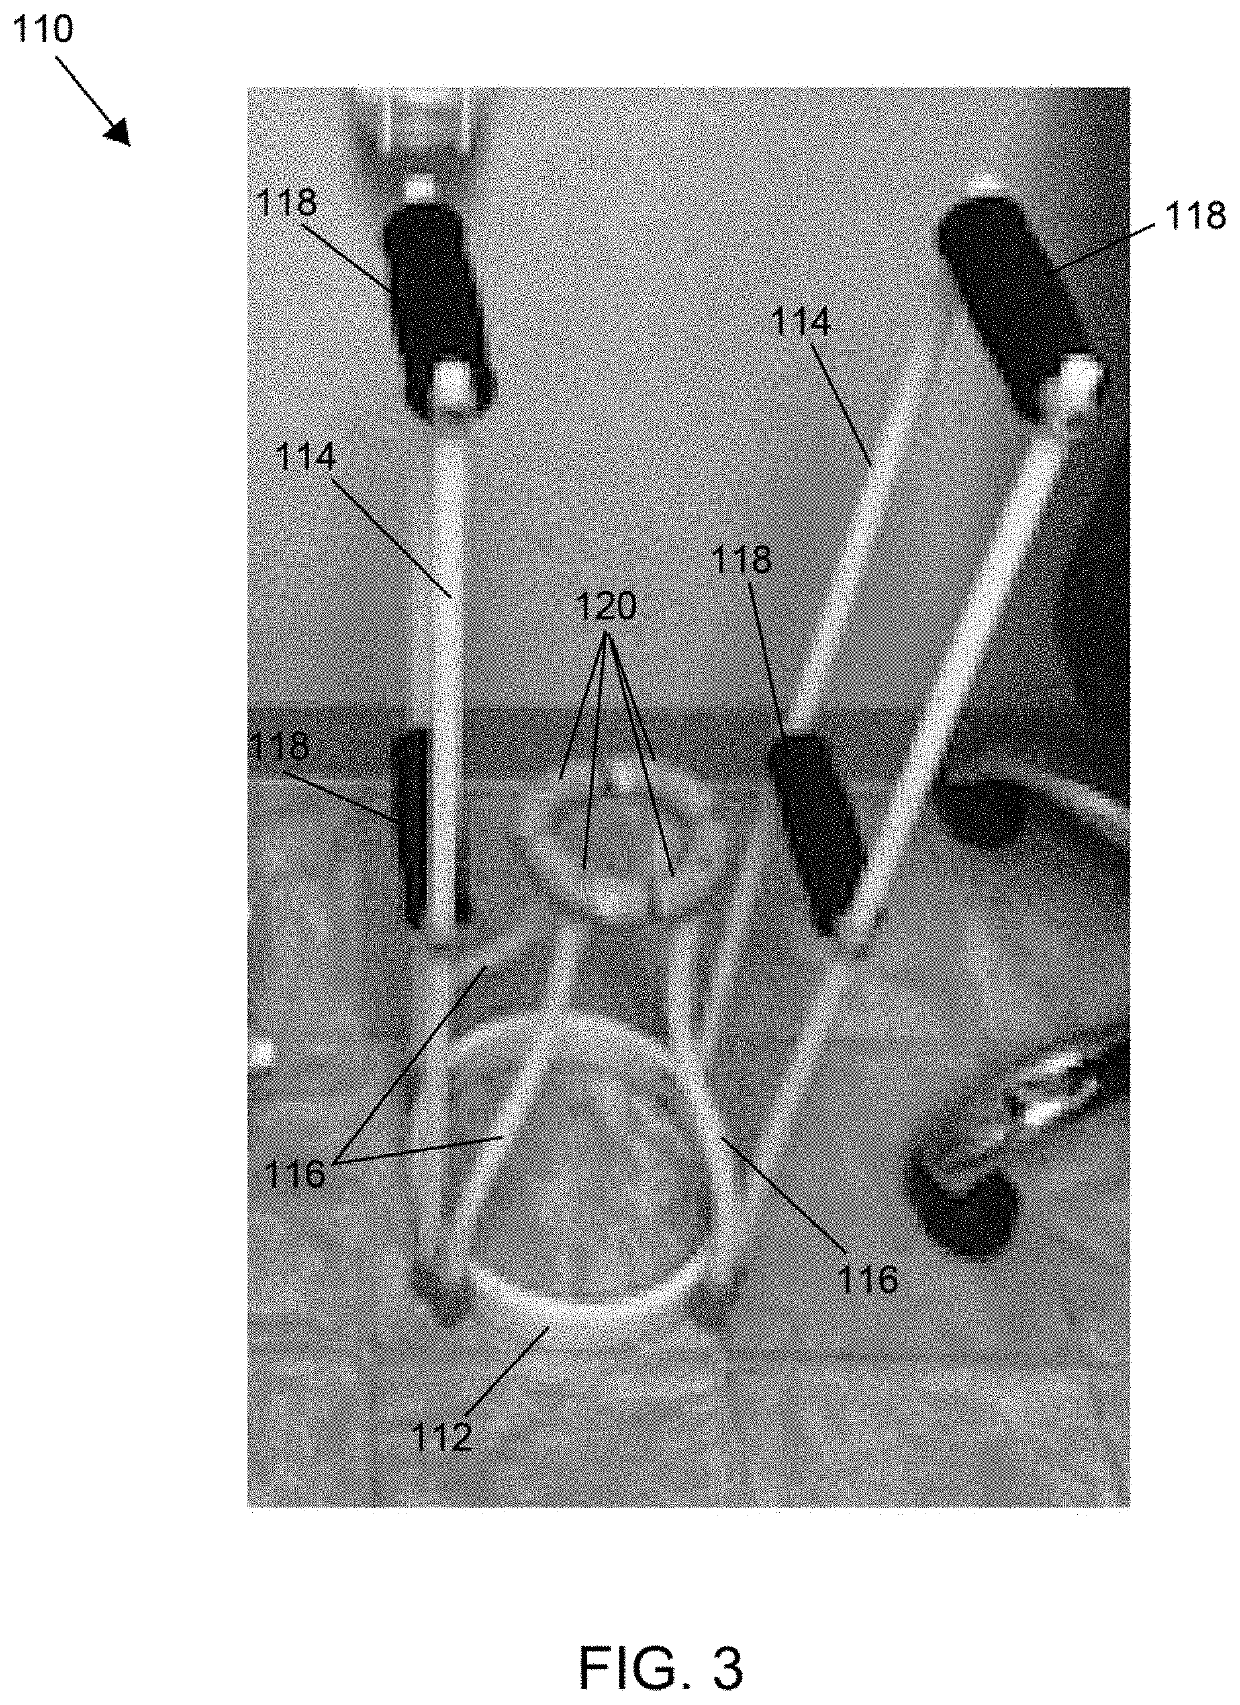 Devices and methods for applying compression socks to feet